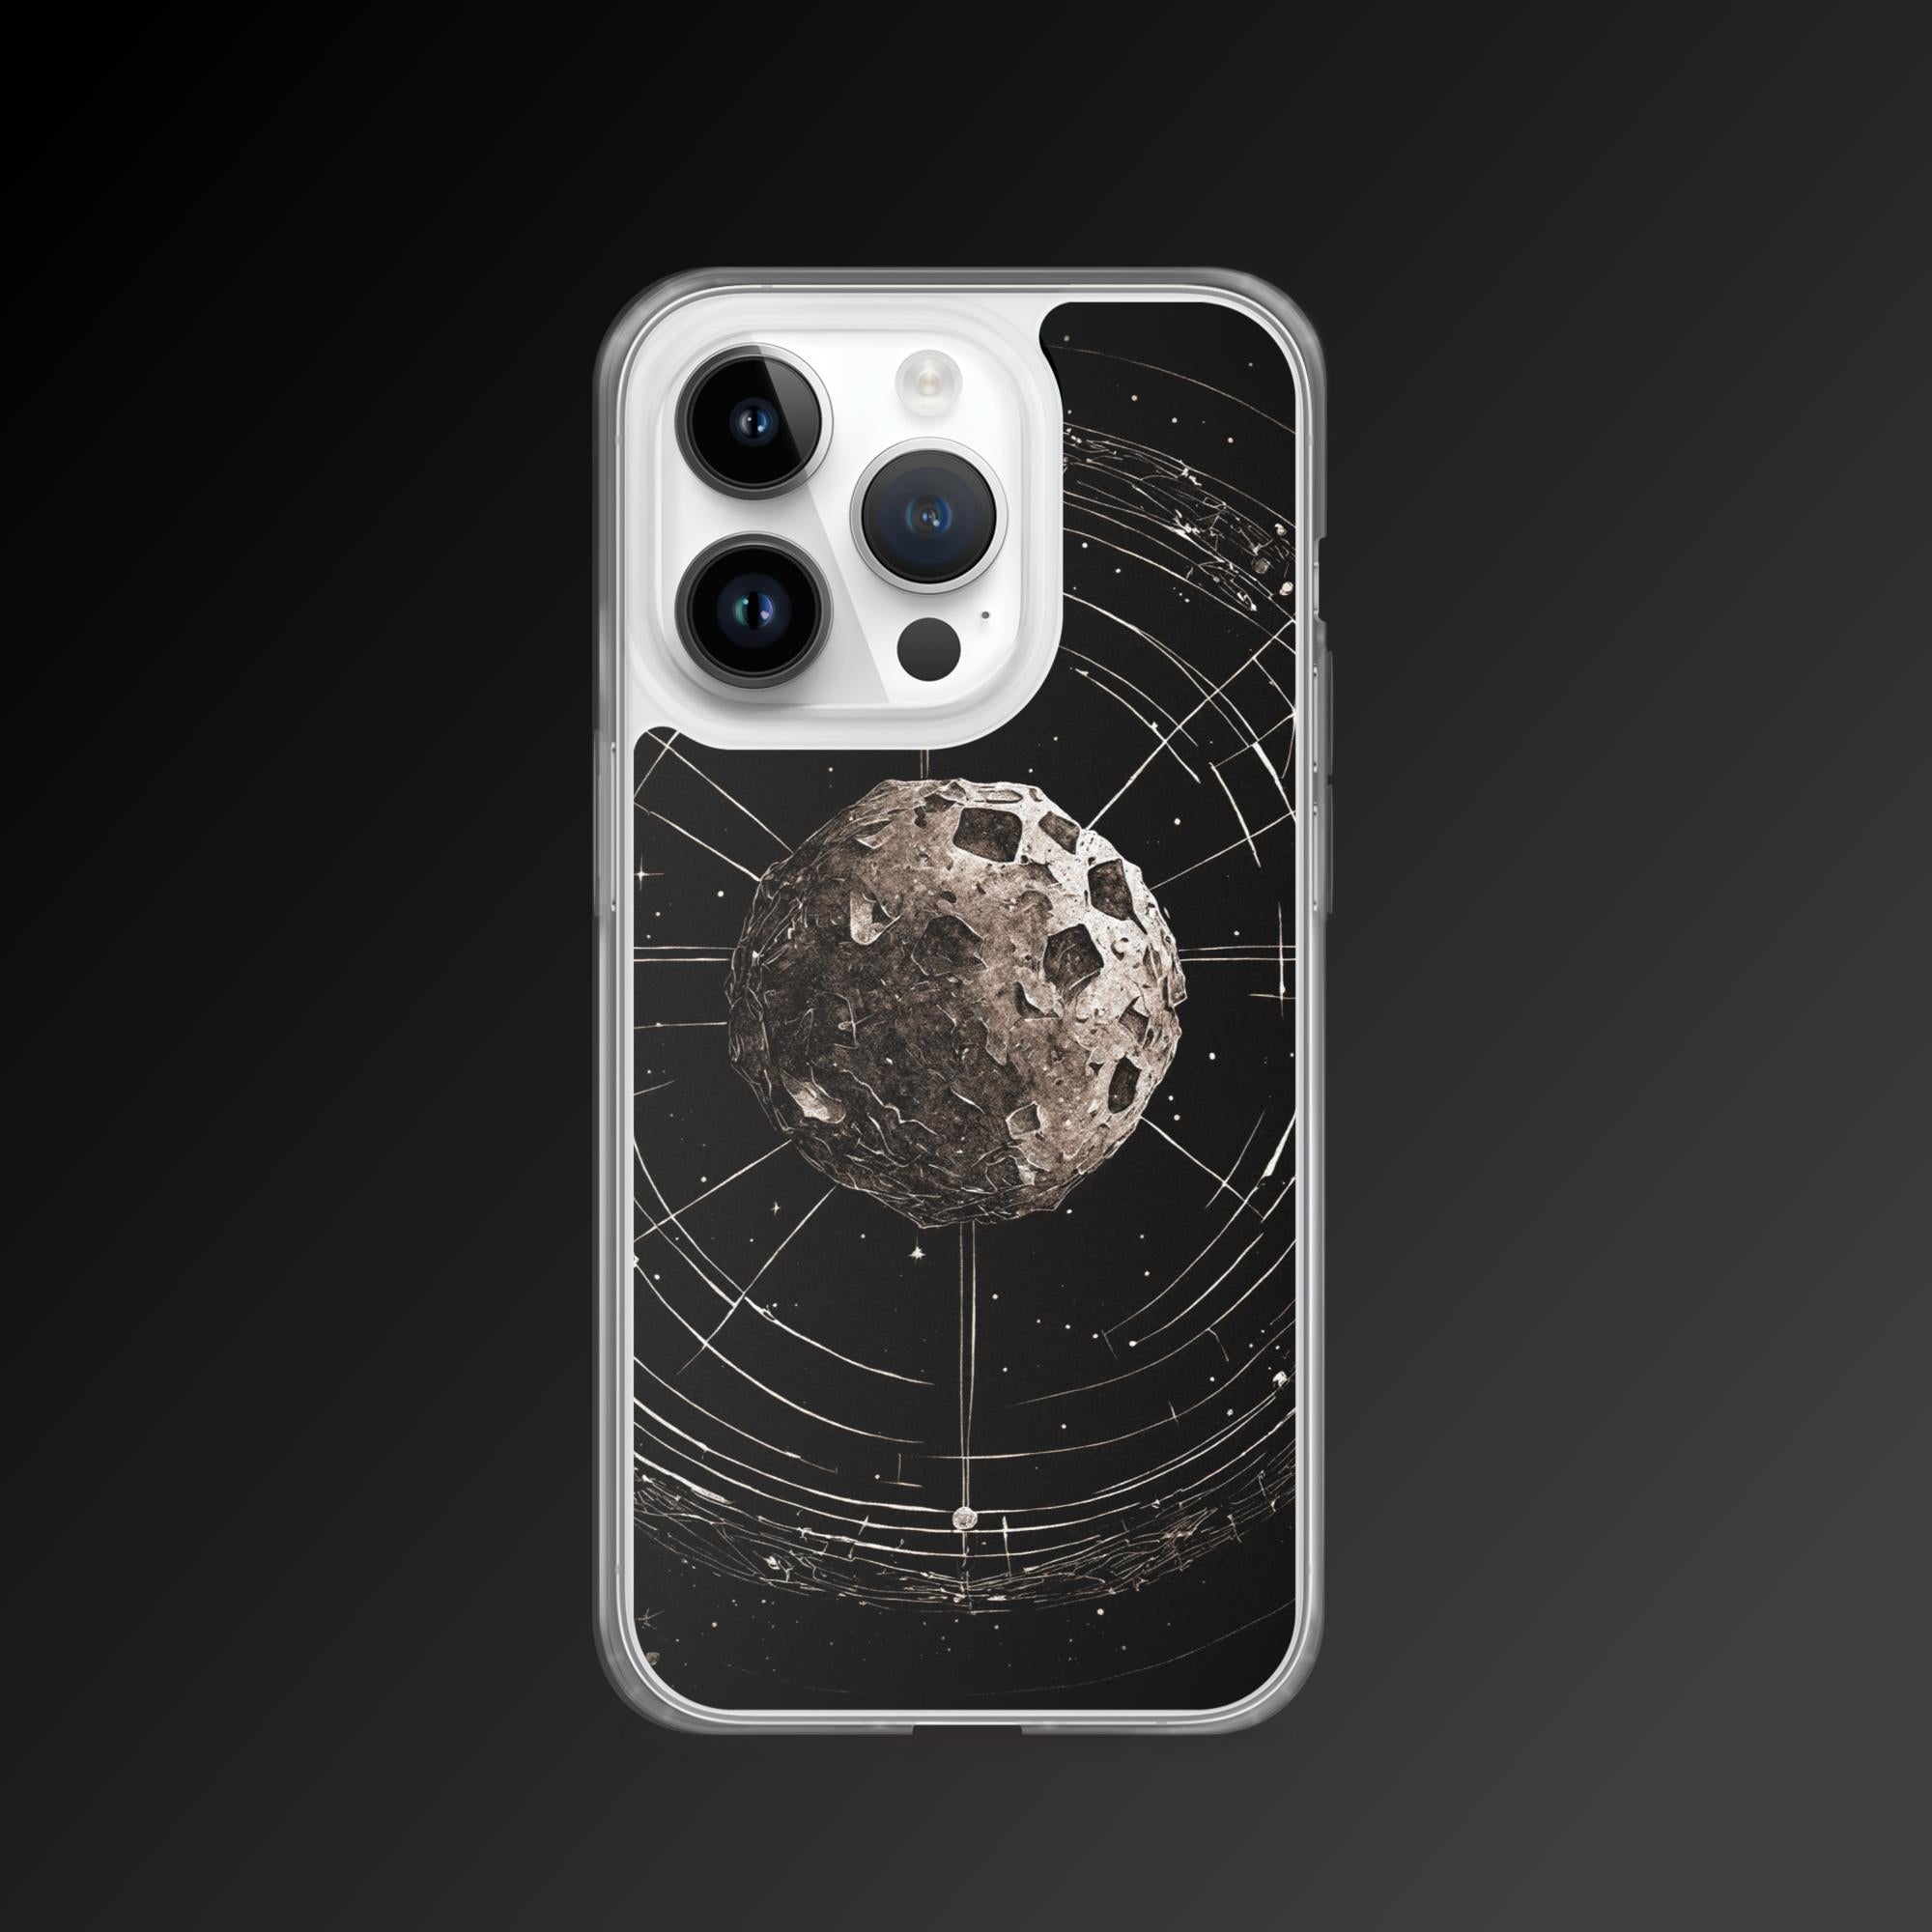 "Lunar space station" clear iphone case - Clear iphone case - Ever colorful